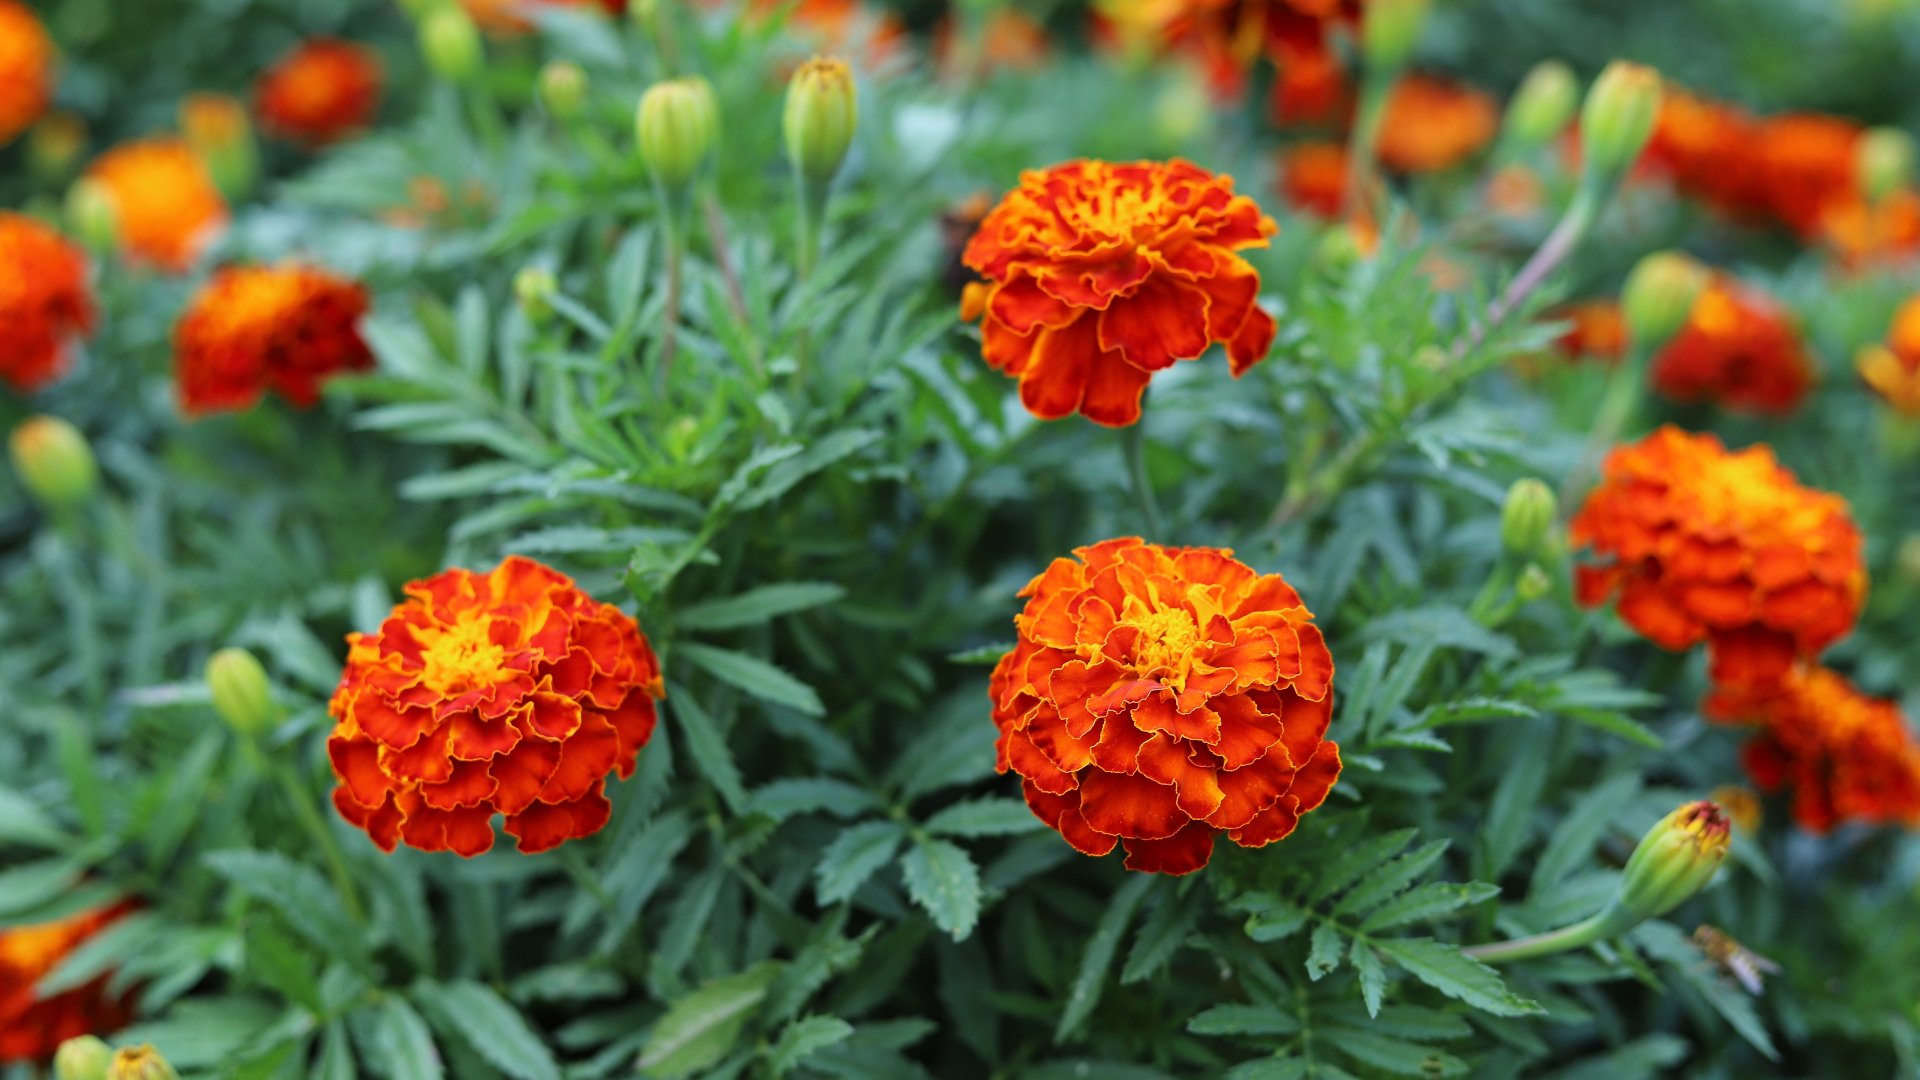 4 Annual Flowers to Consider Adding to Your Landscape Beds This Fall!